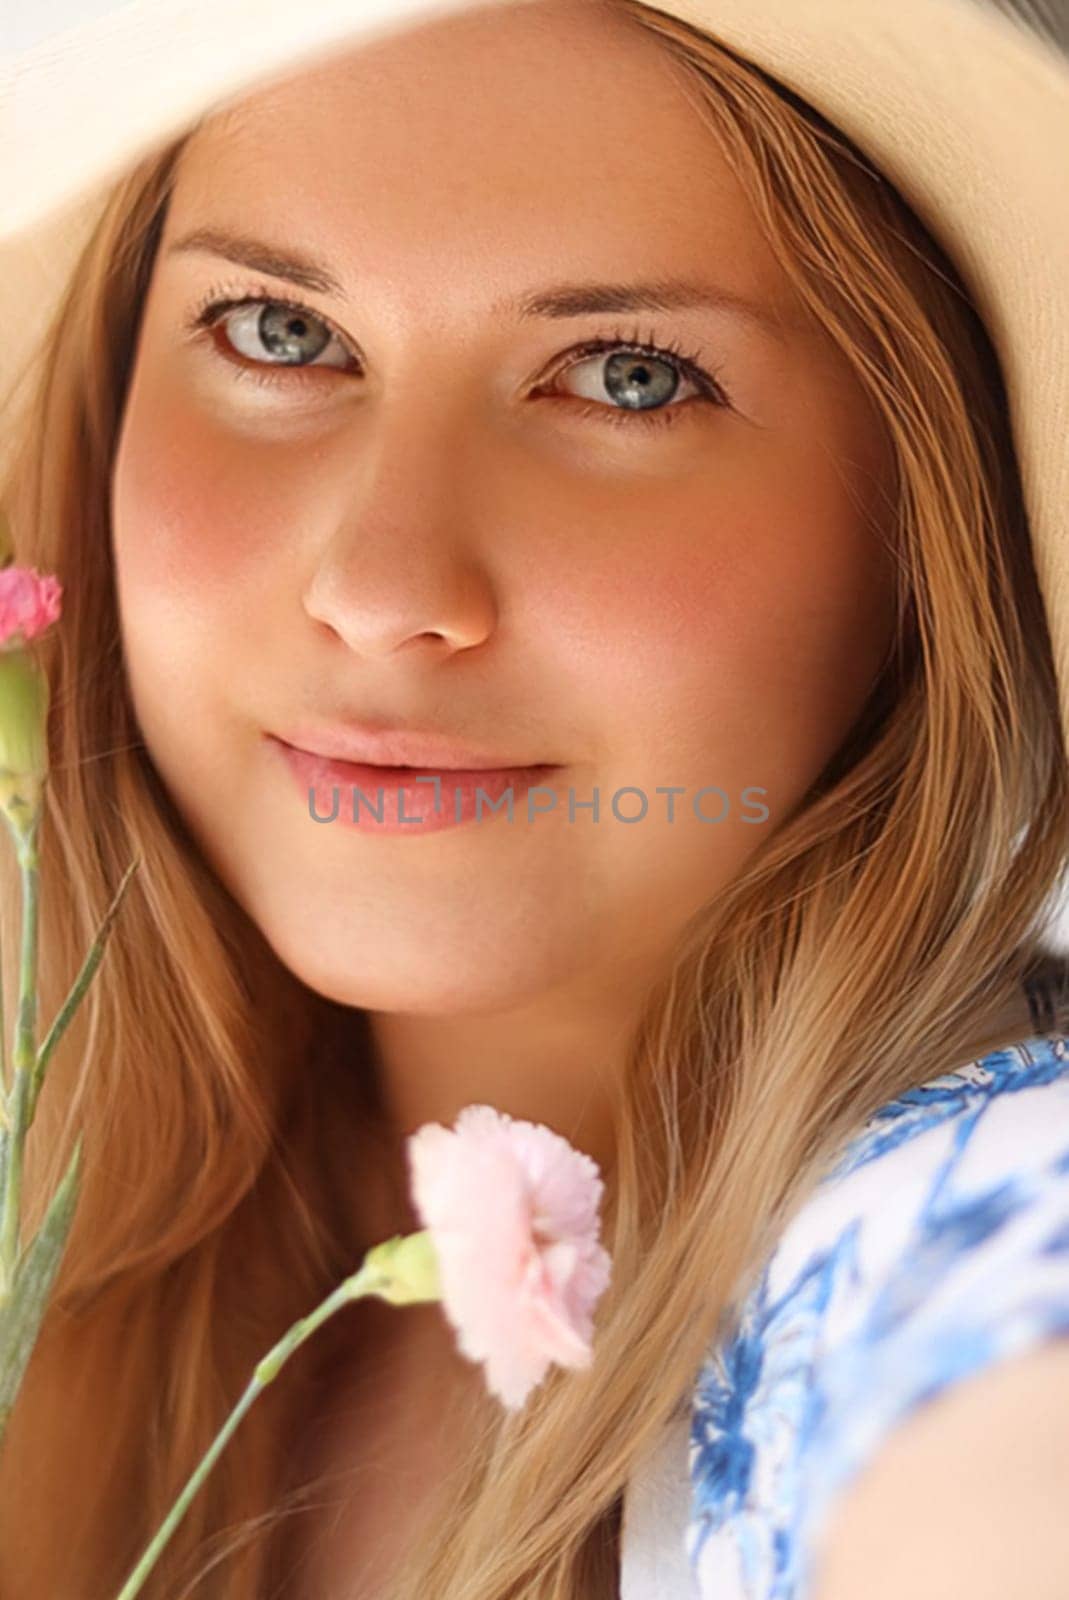 Beauty, summer and skincare, beautiful woman in hat with flower as cosmetics, wellness and lifestyle fashion portrait